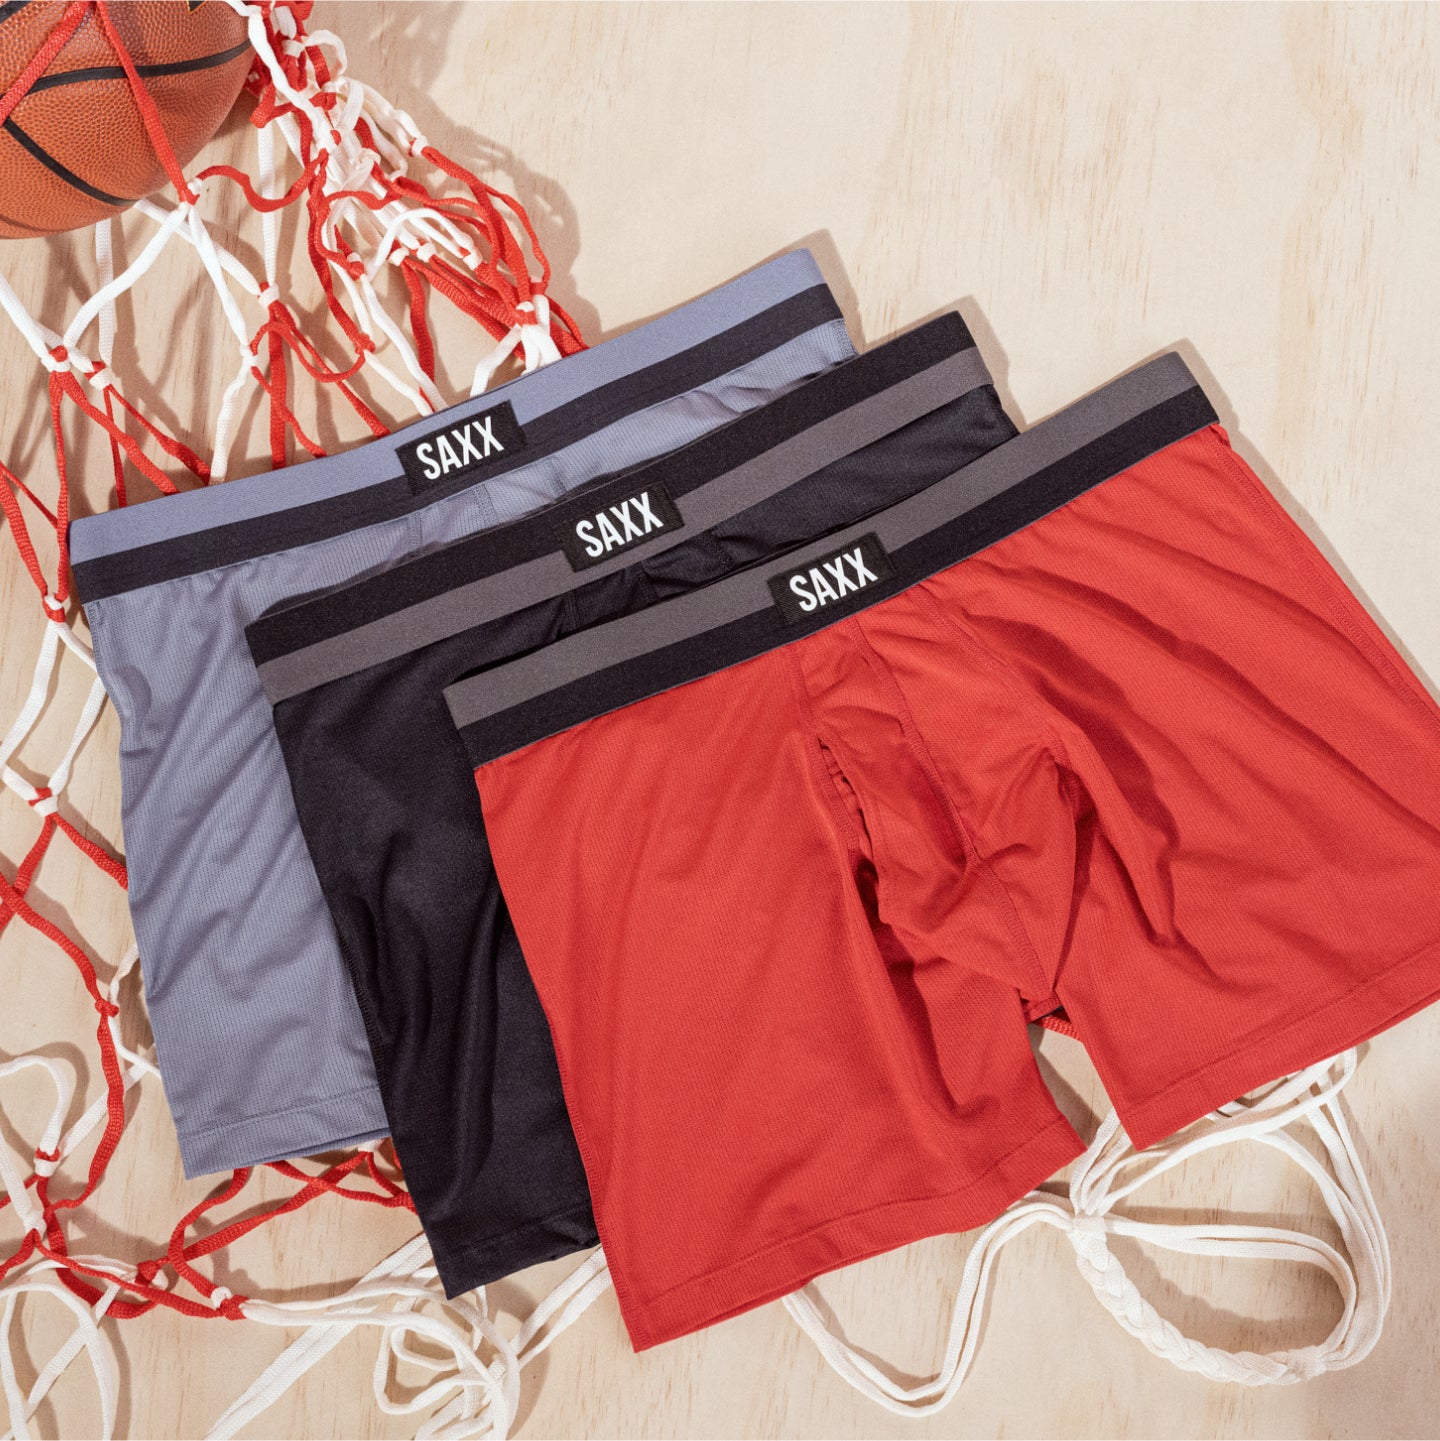 Three pairs of boxer briefs laid on top of a basketball net. The pairs are ordered in red, black, and light blue colors.